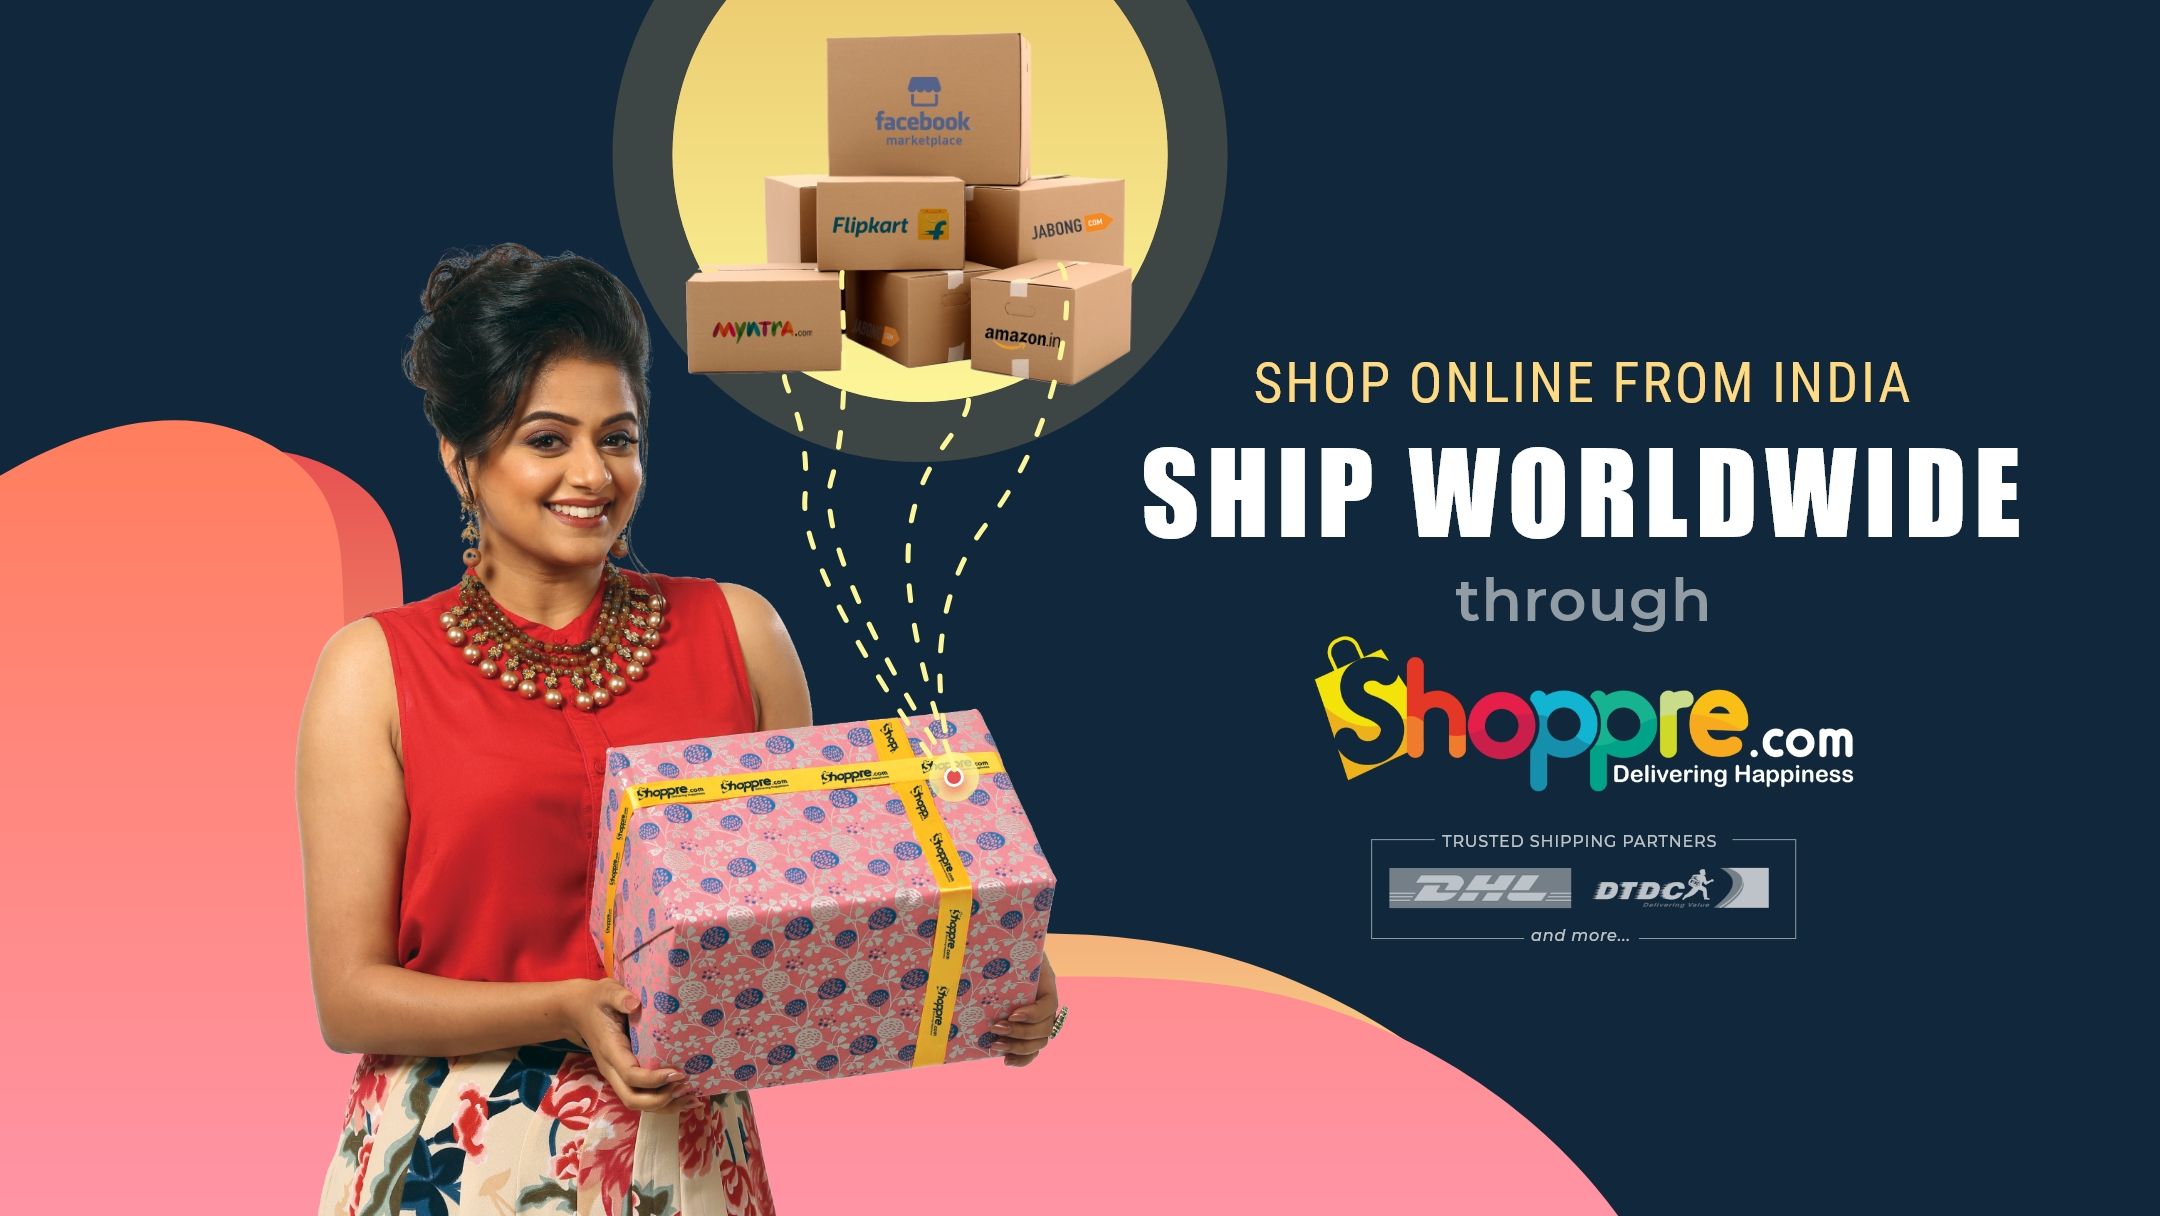 Flipkart Delivers More Than Packages: Check Out Our Sizzling Photos!